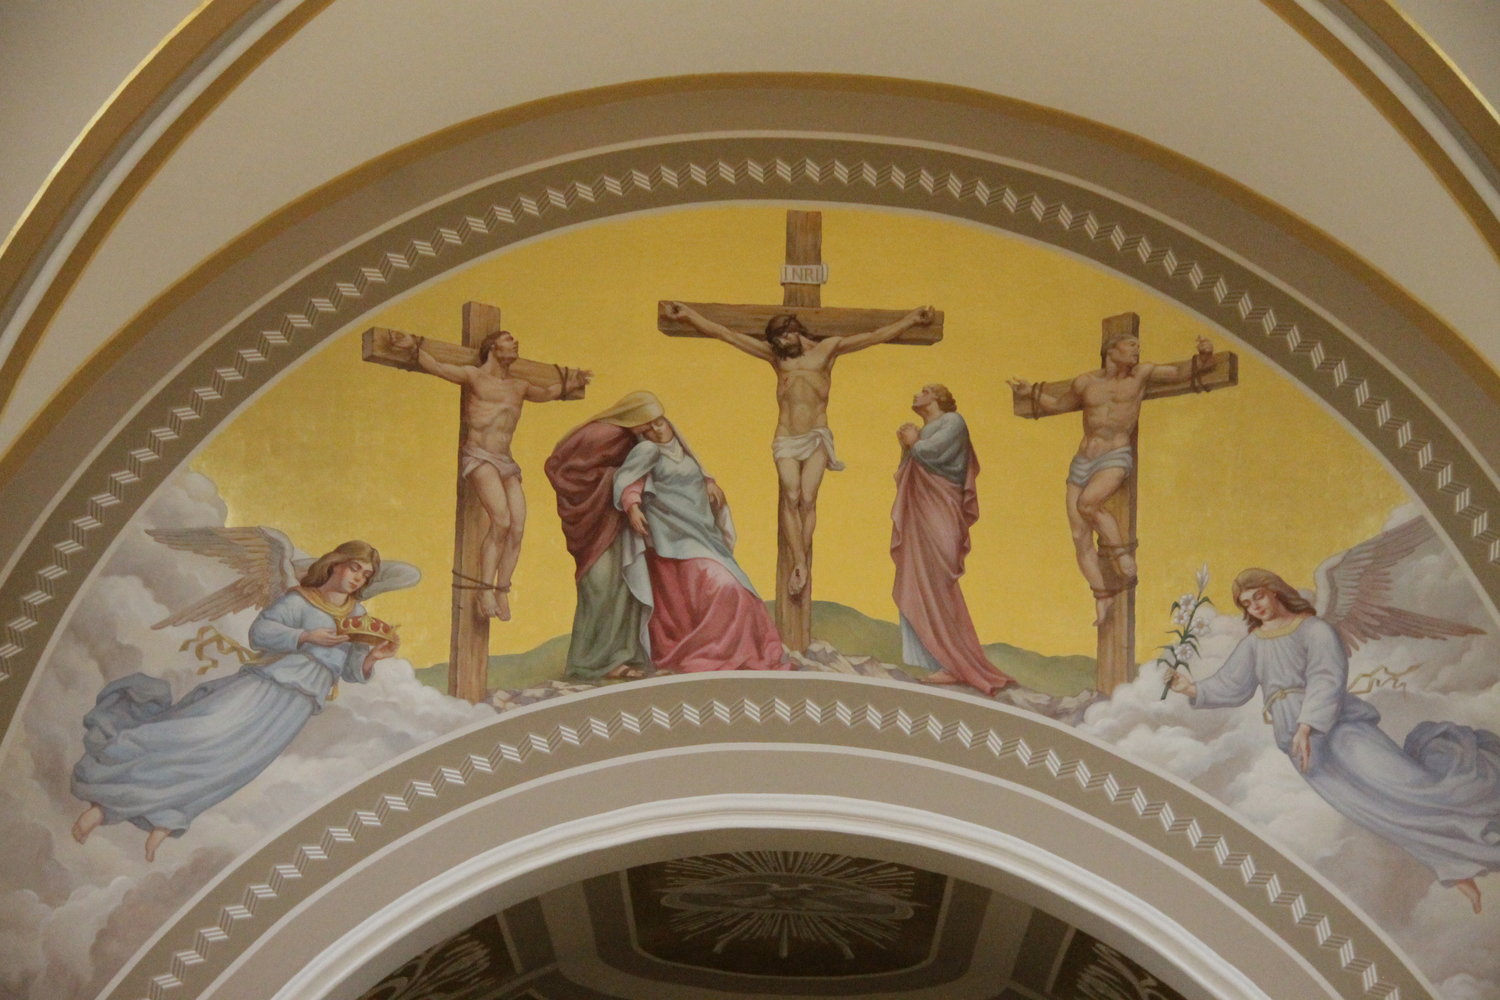 This nearly 25-foot-wide, gilded mural depicting the Crucifixion adorns the chancel arch above the altar in St. Joseph Church in Westphalia. It is part of a nearly completed, massive renovation of the church.